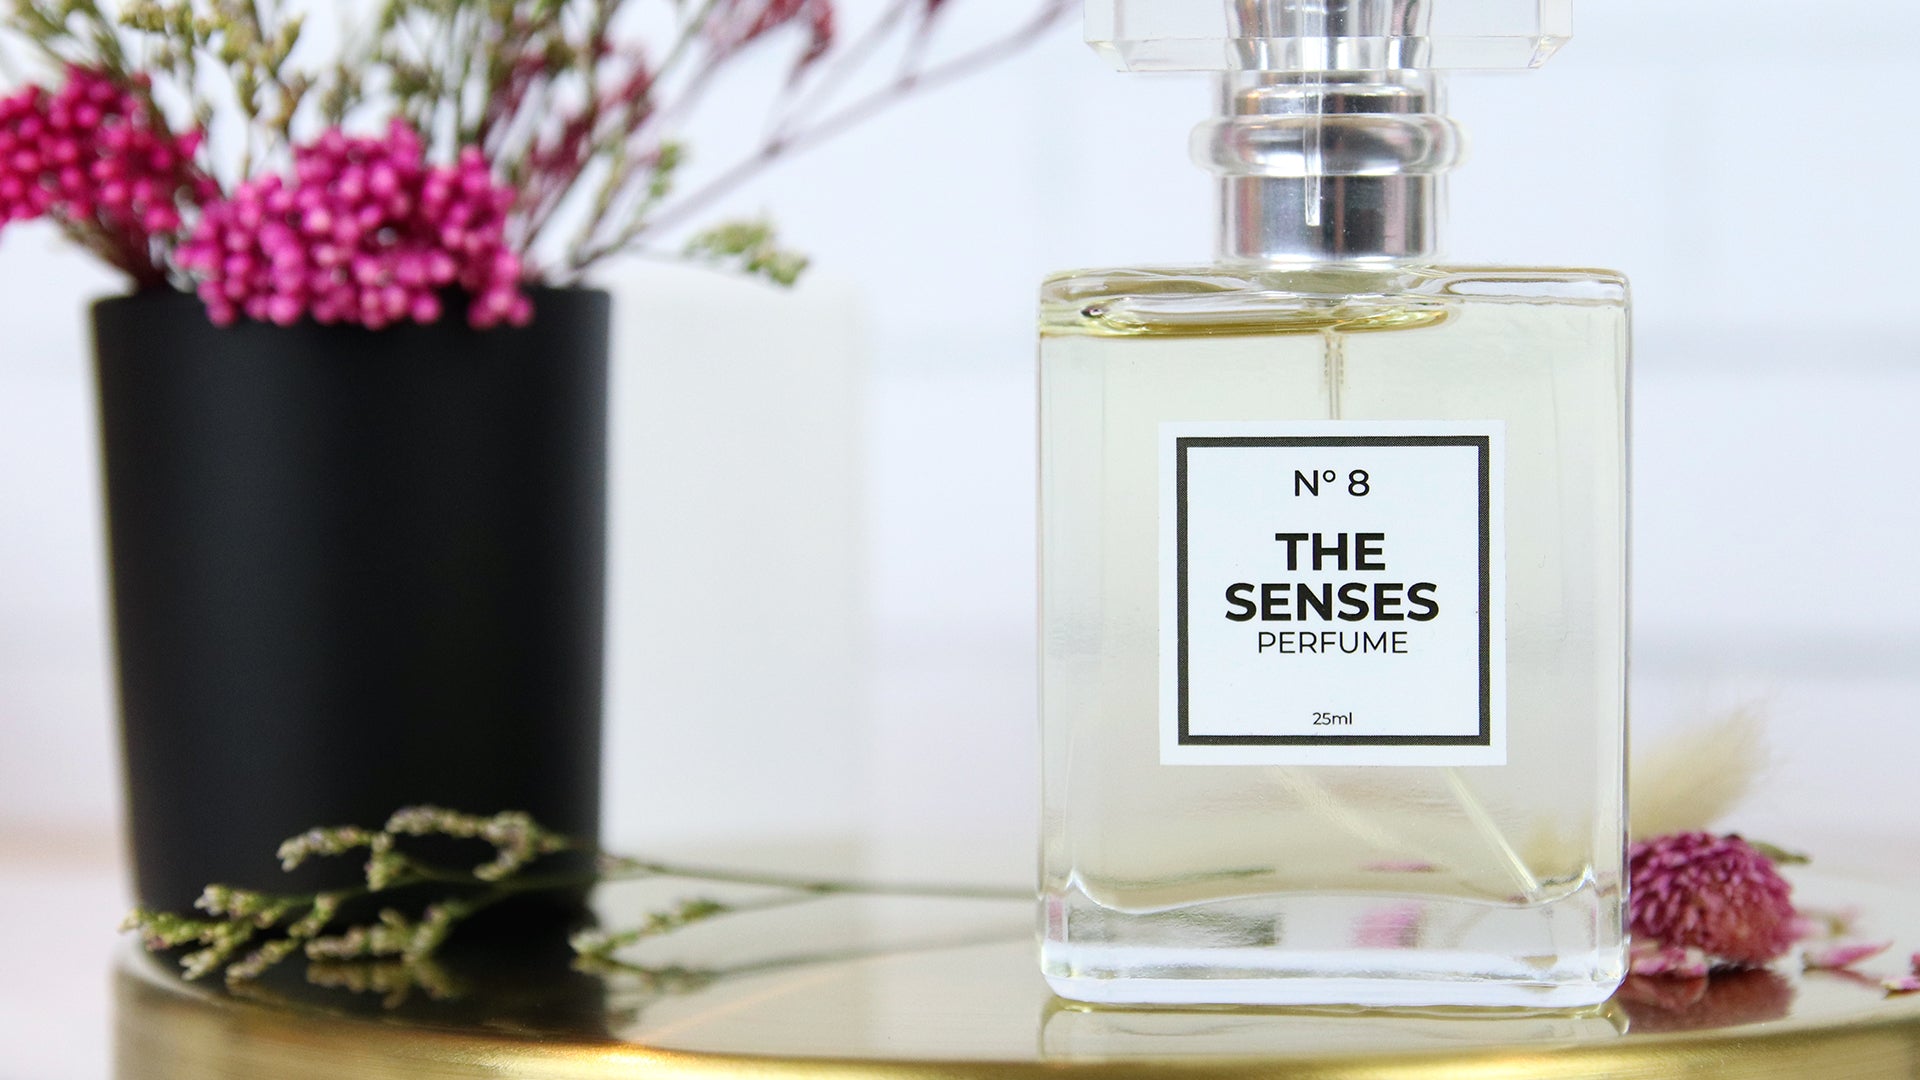 White vinyl cosmetic label applied to perfume bottle